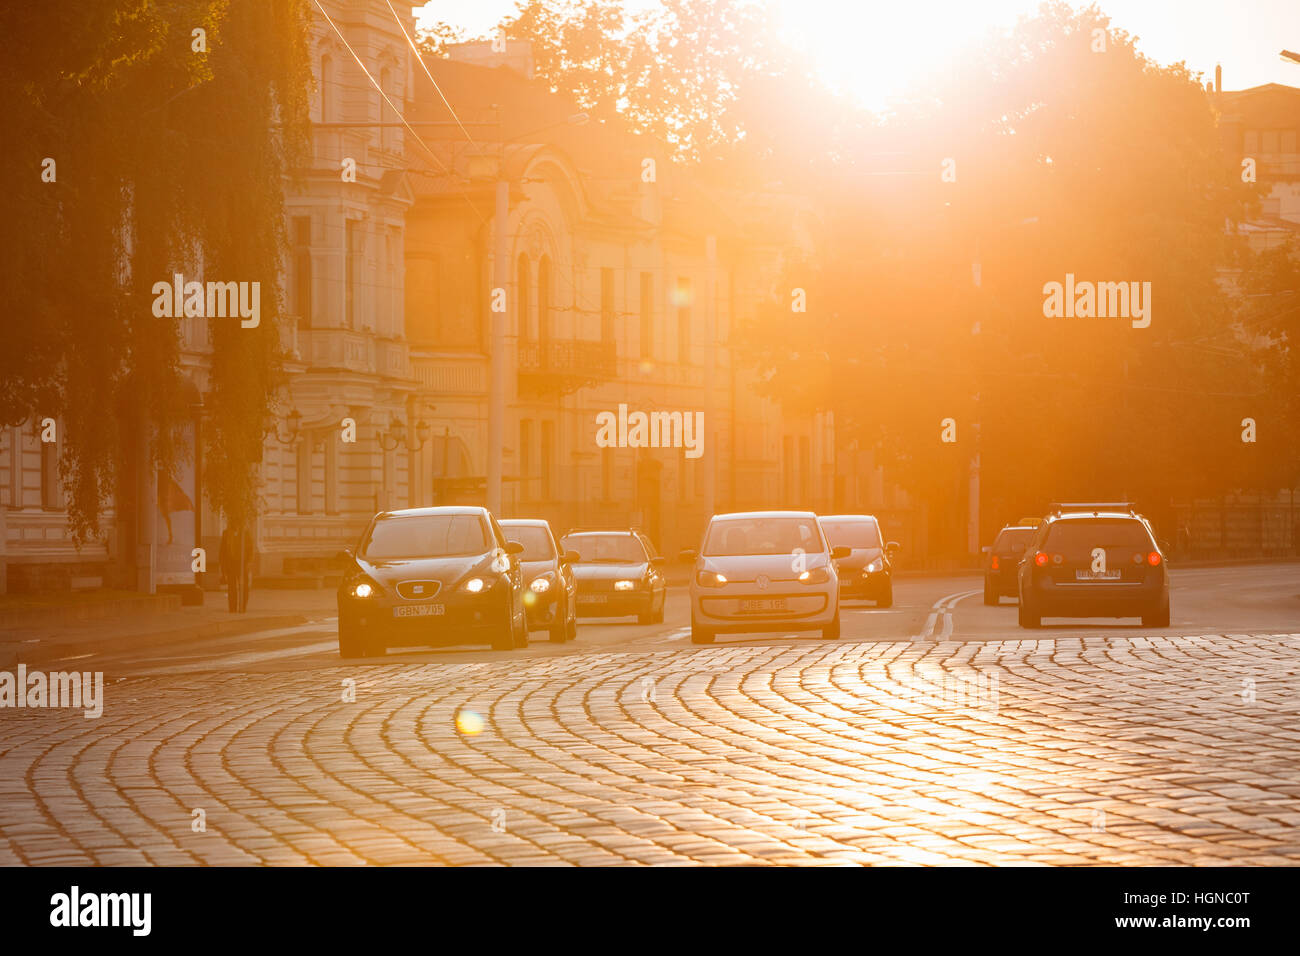 Vilnius, Lithuania  - July 8, 2016: Traffic On Zygimantu Street In Old Town. Moving Cars With Luminous Headlights On The Paved Road In Yellow Sunlight Stock Photo